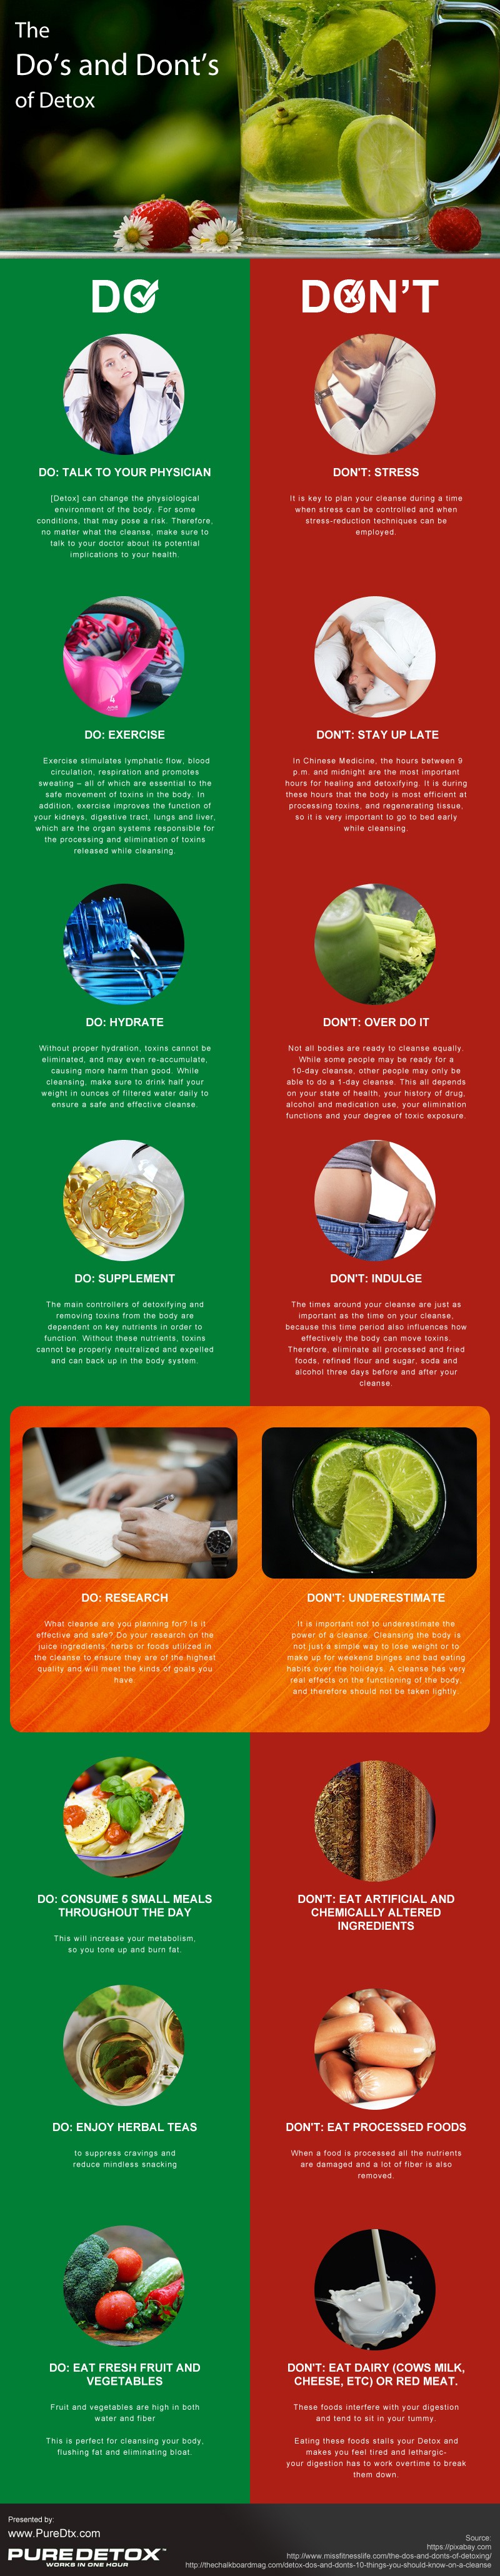 The Do's and Dont's of Detox [infographic]